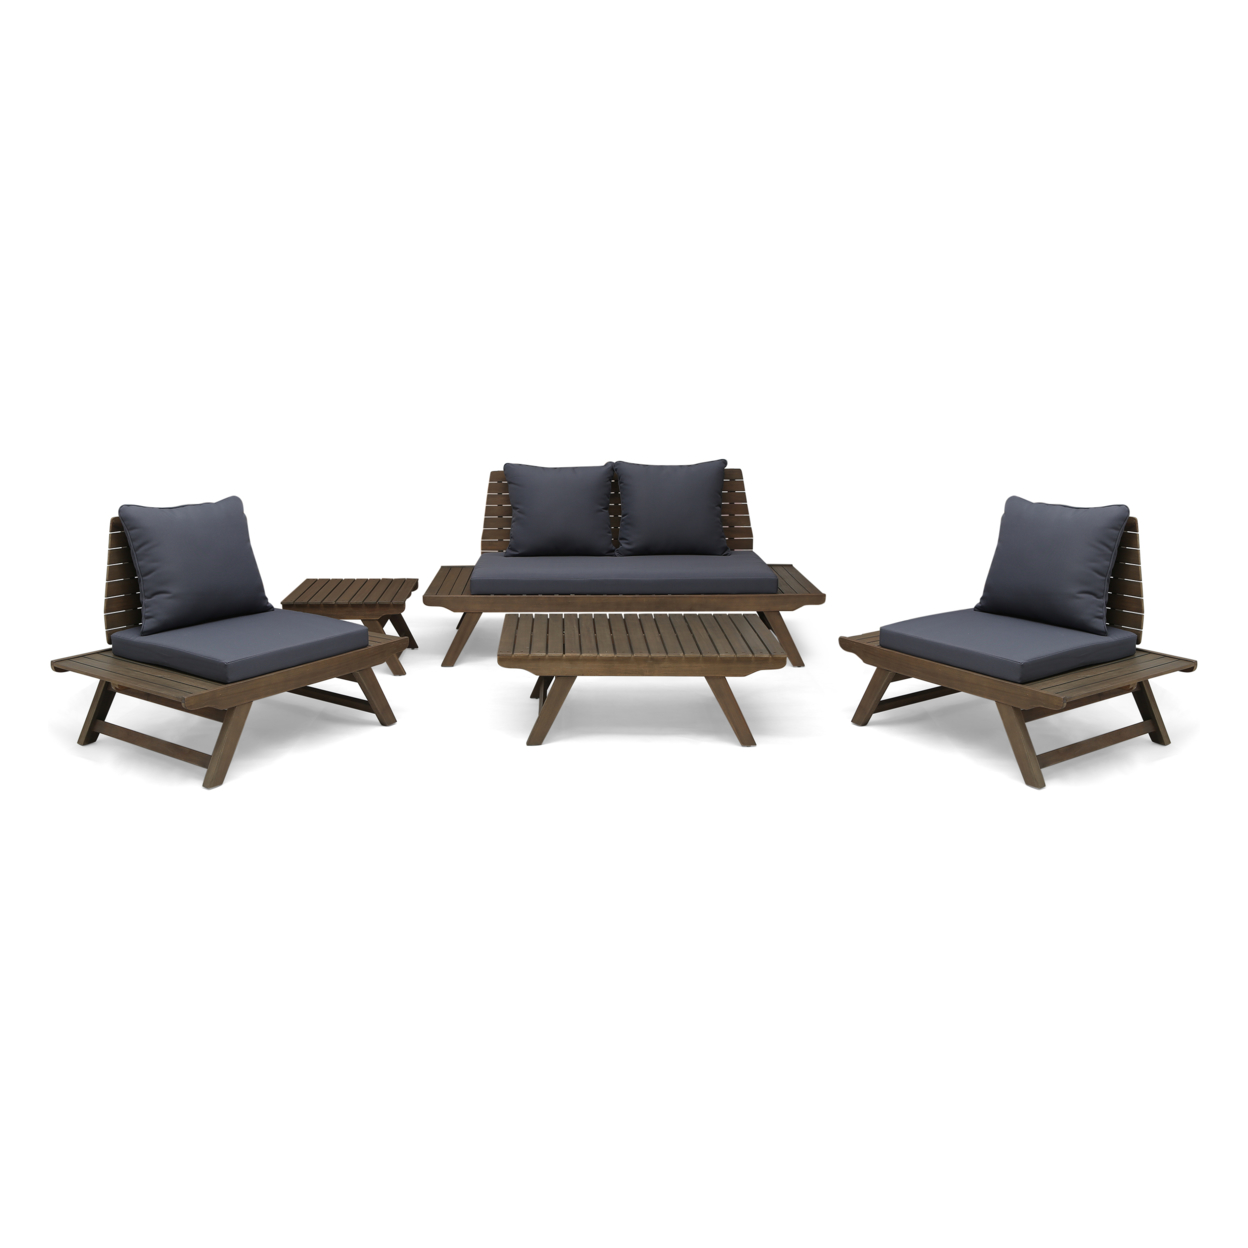 Martha Outdoor Acacia Wood 4 Seater Chat Set With Side Table And Coffee Table - Gray + Dark Gray